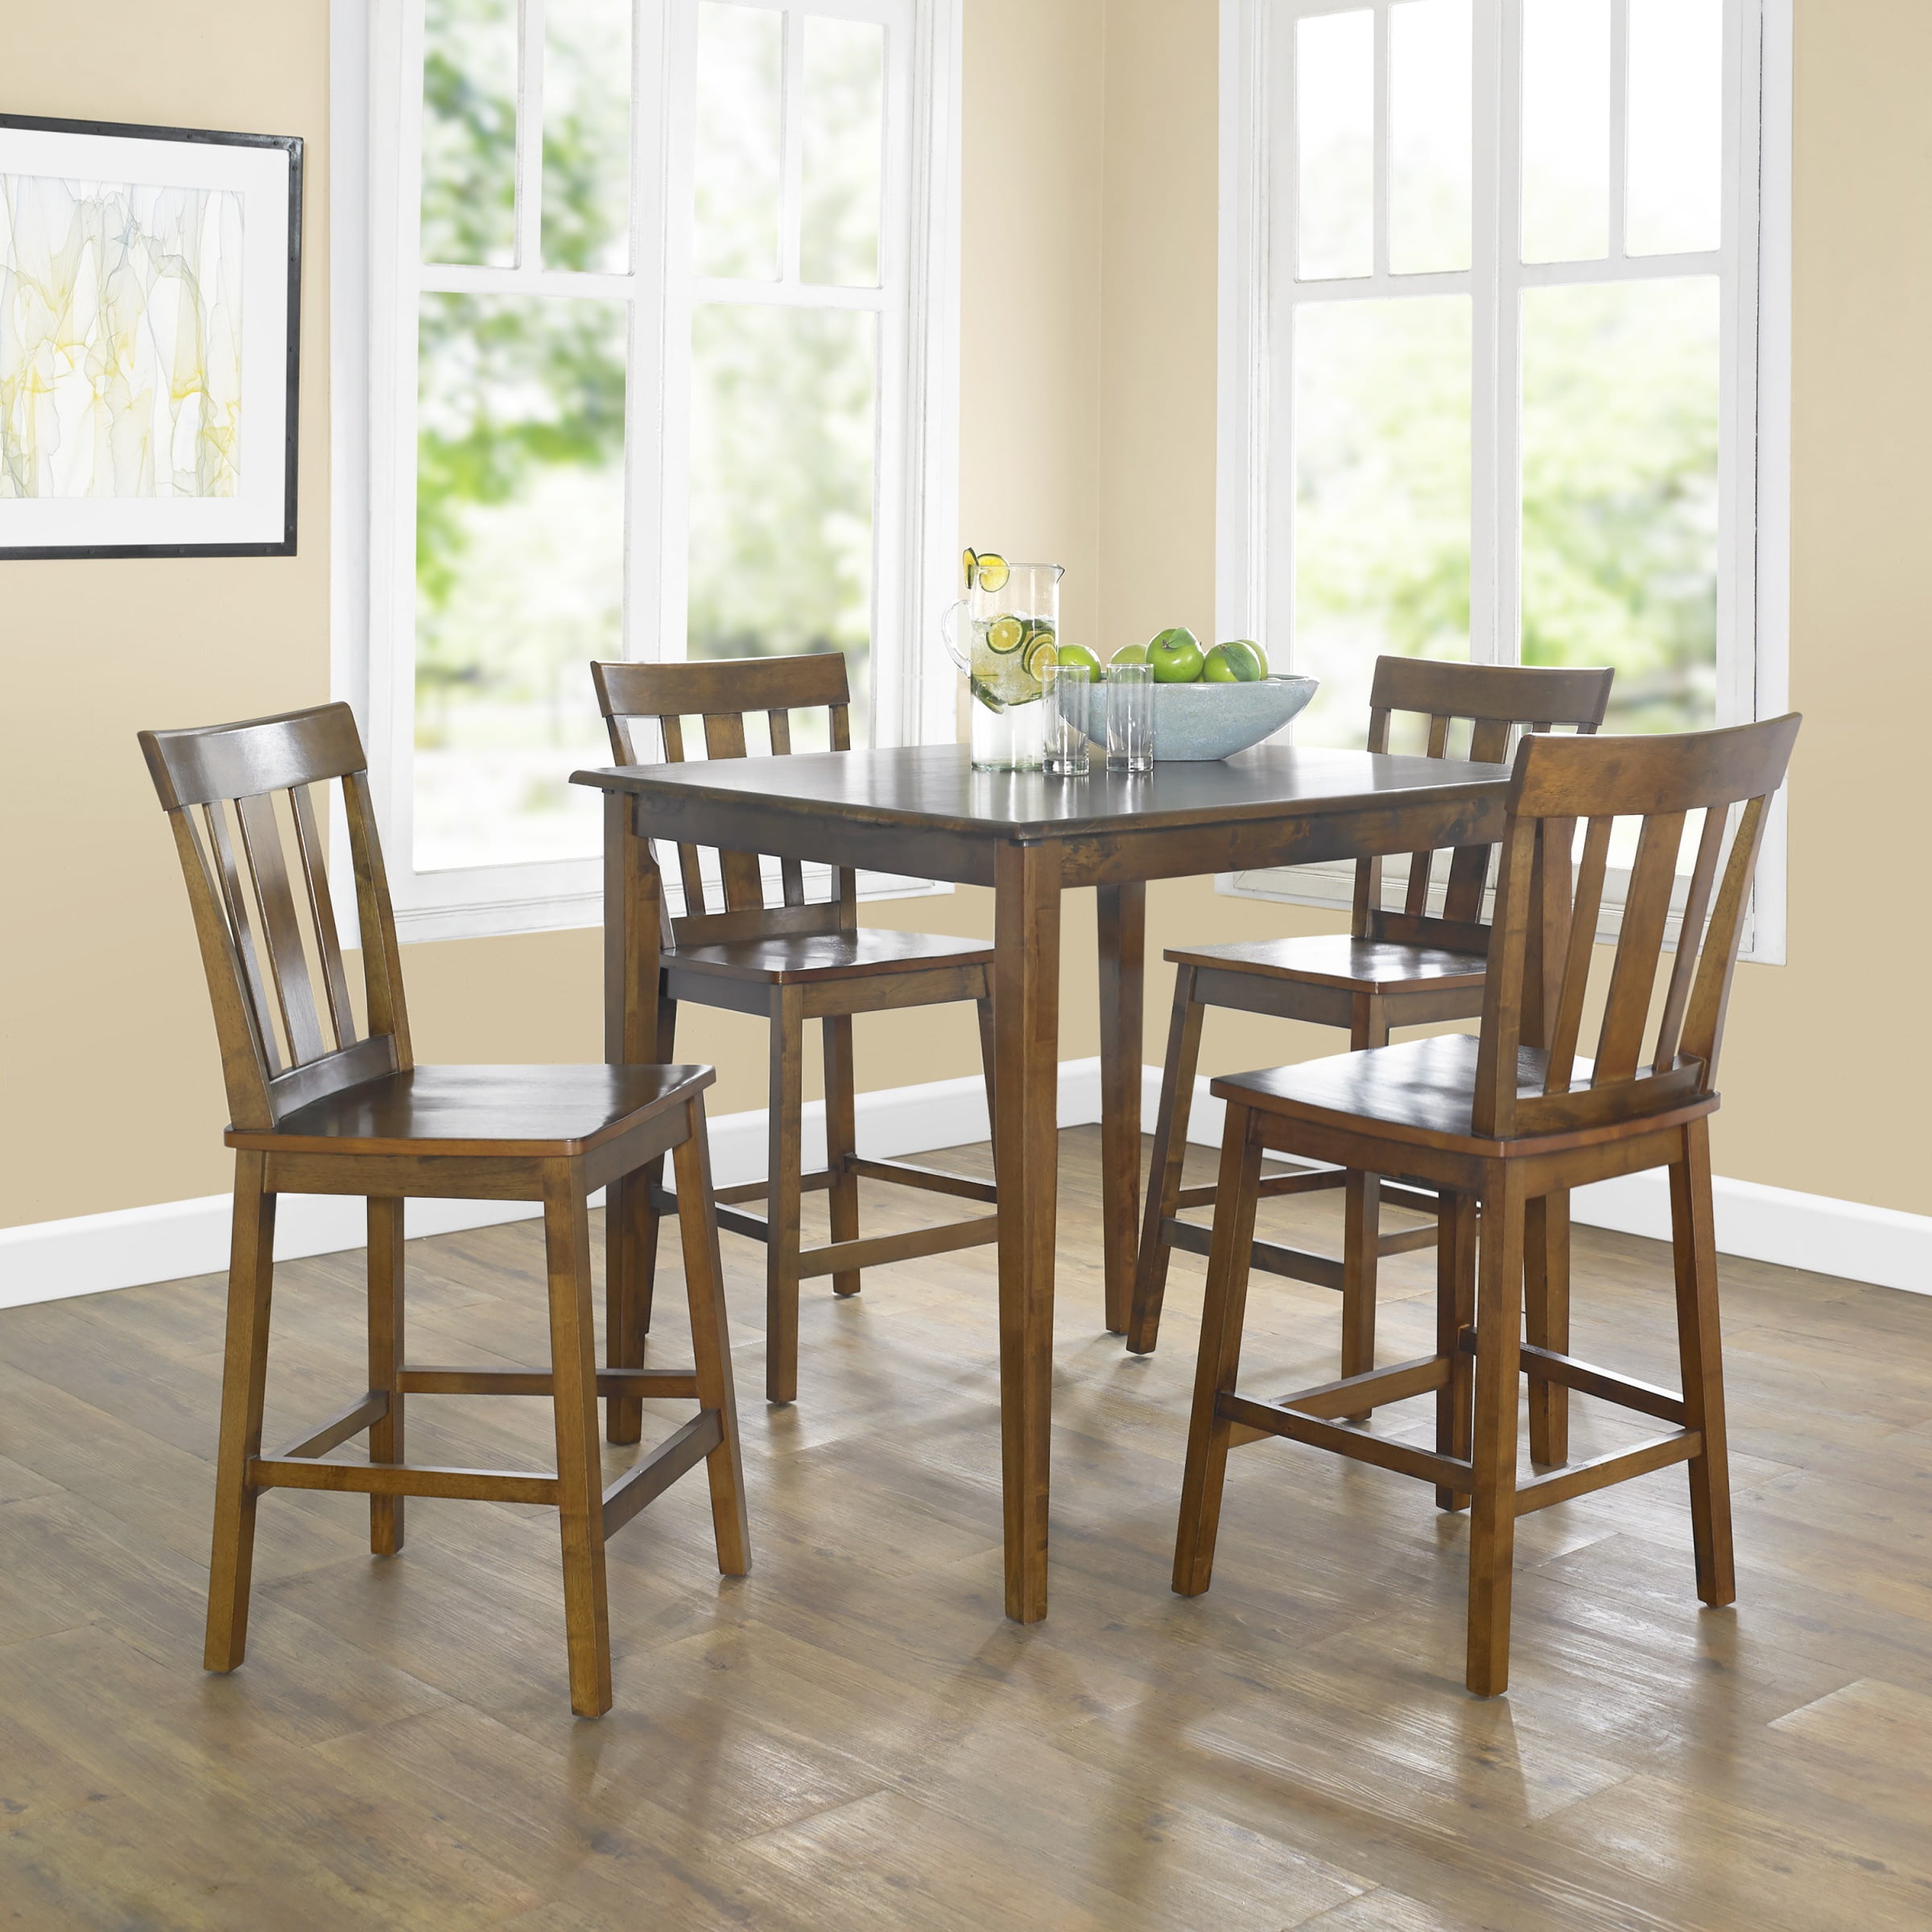 Mainstays 5 Piece Mission Counter, What Is A Counter Height Dining Table